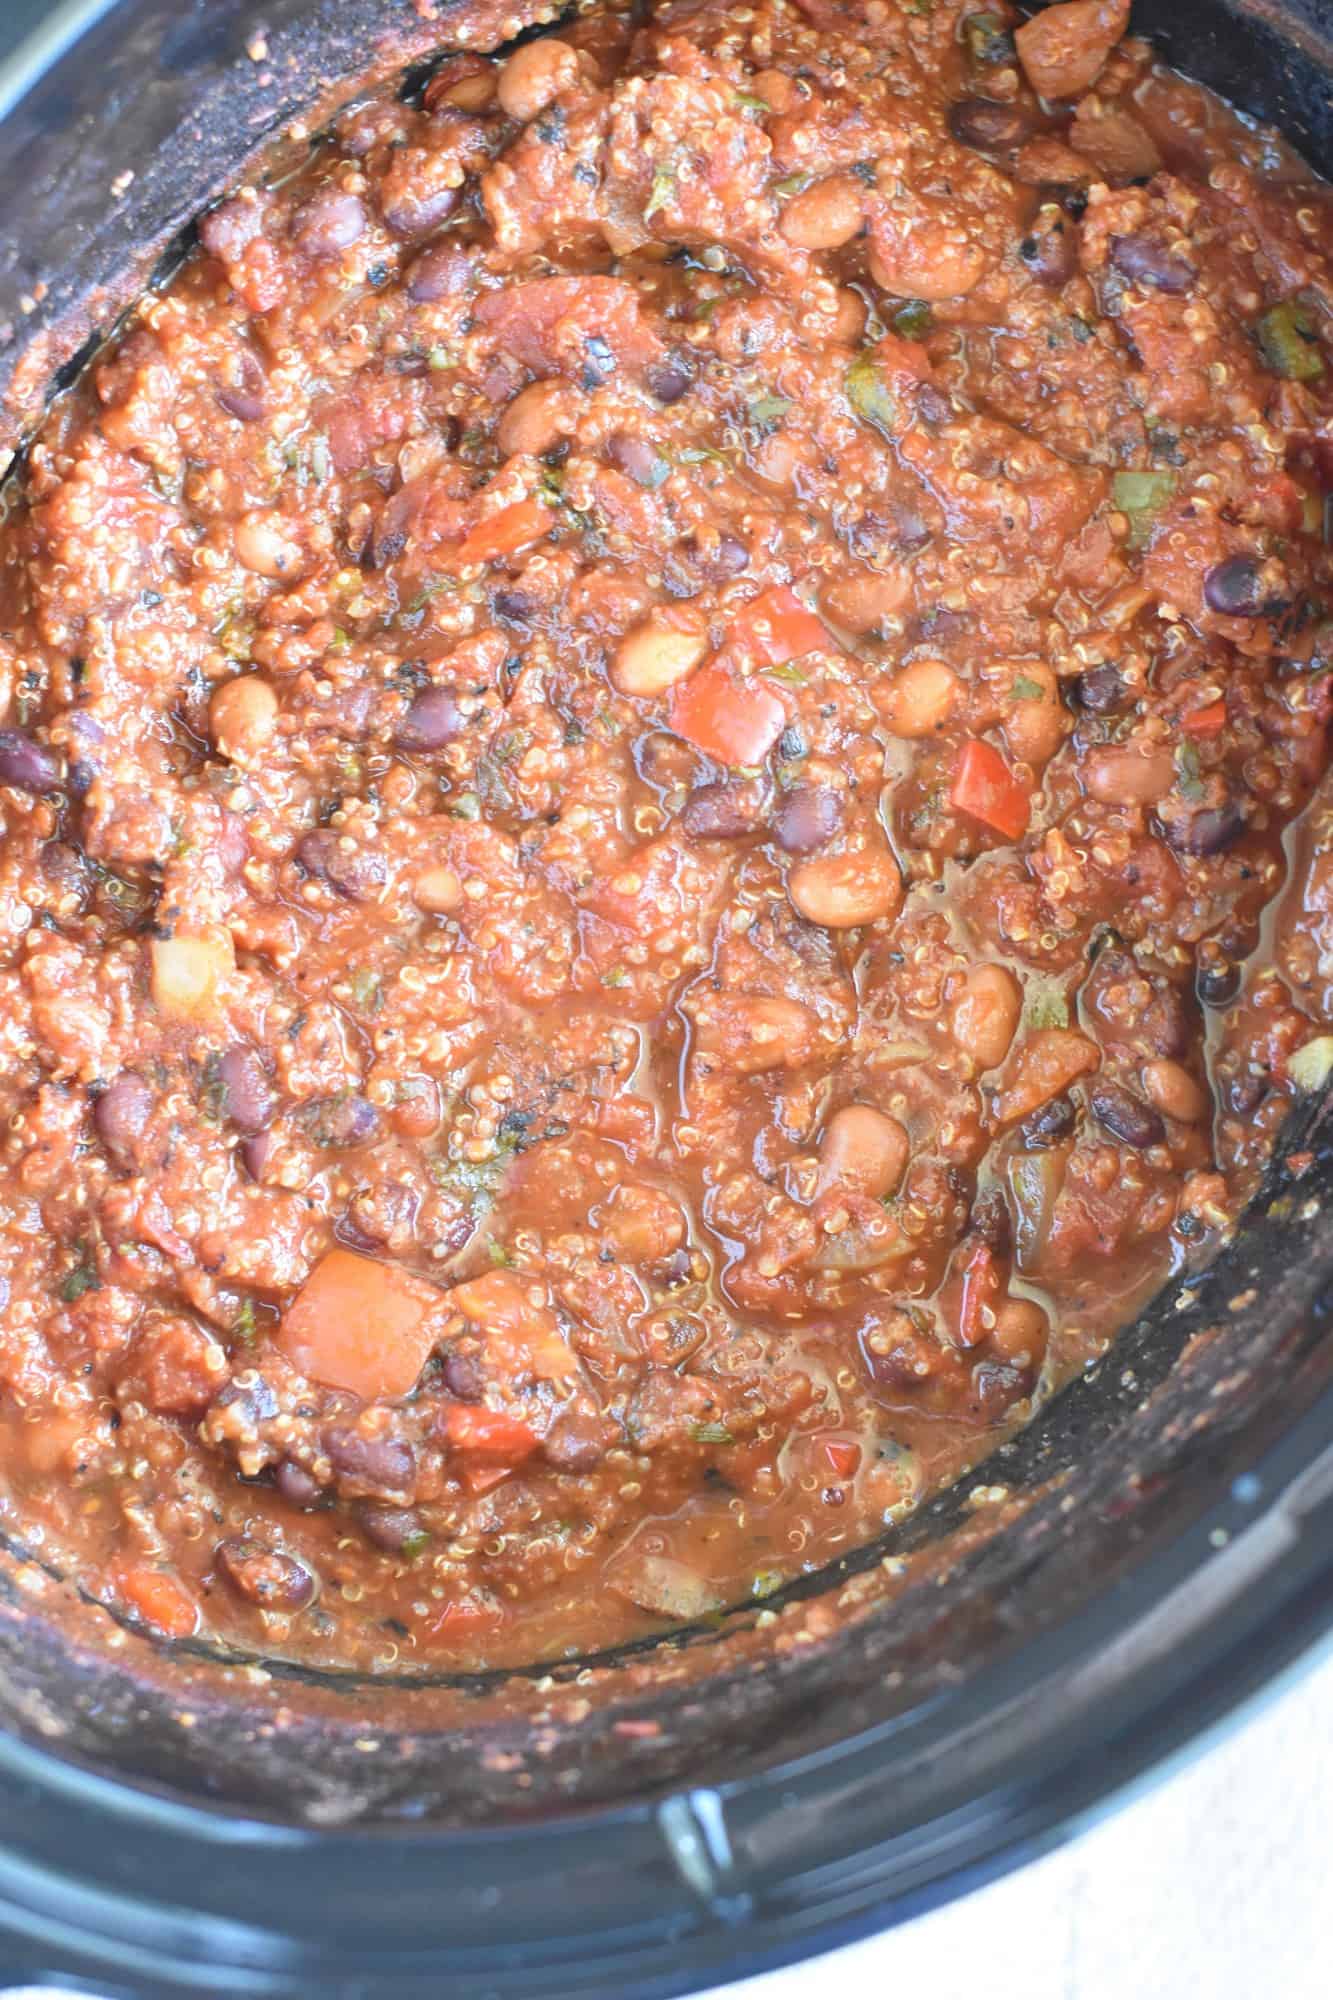 cooked chili in the slow cooker